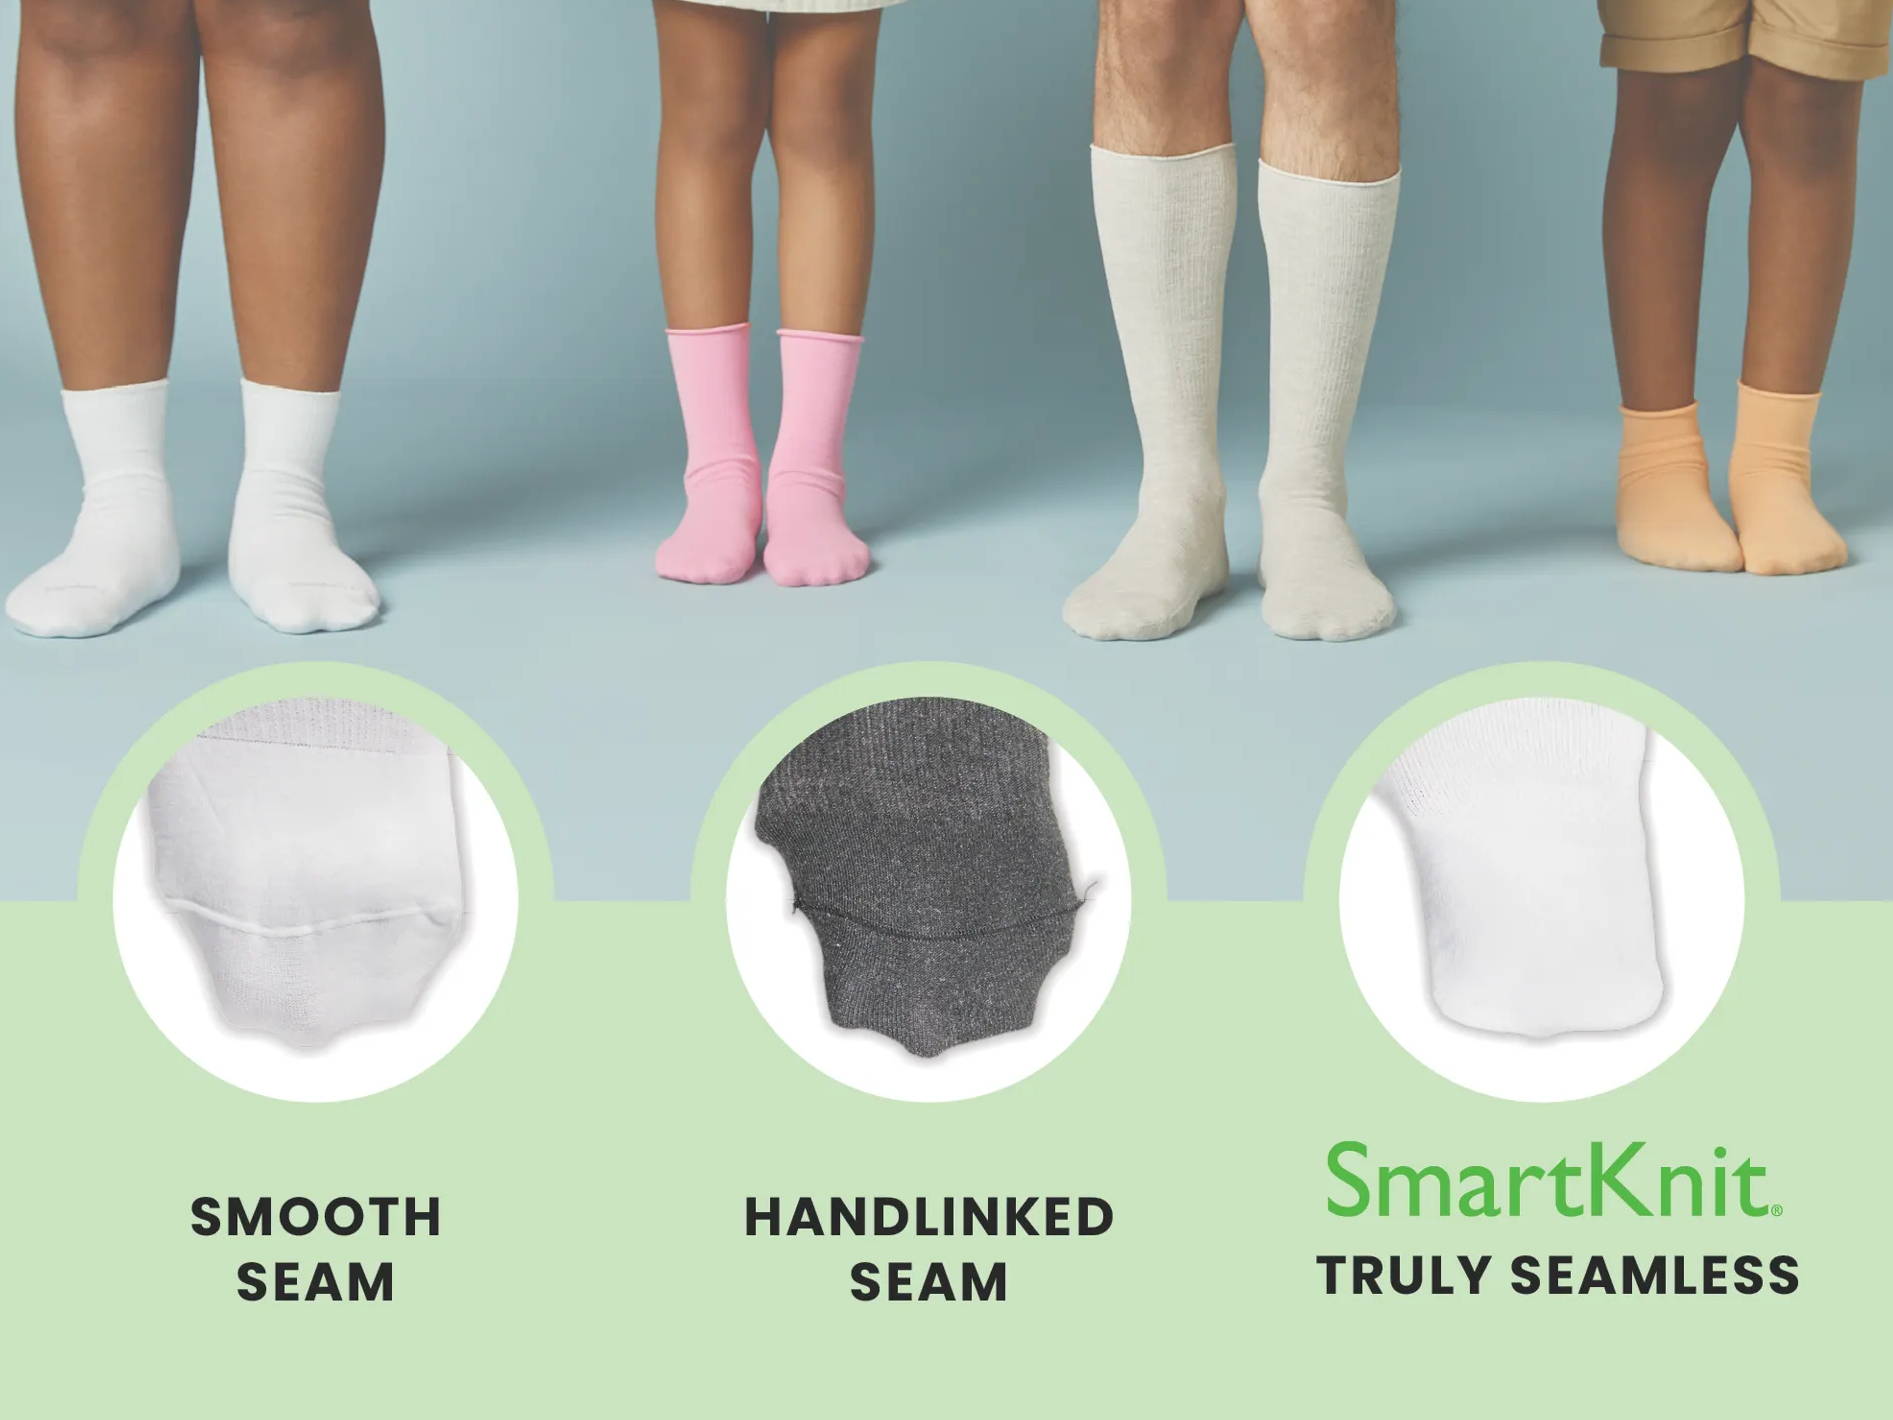 Smooth seam, handlinked seam, and why SmartKnit socks are truly seamless